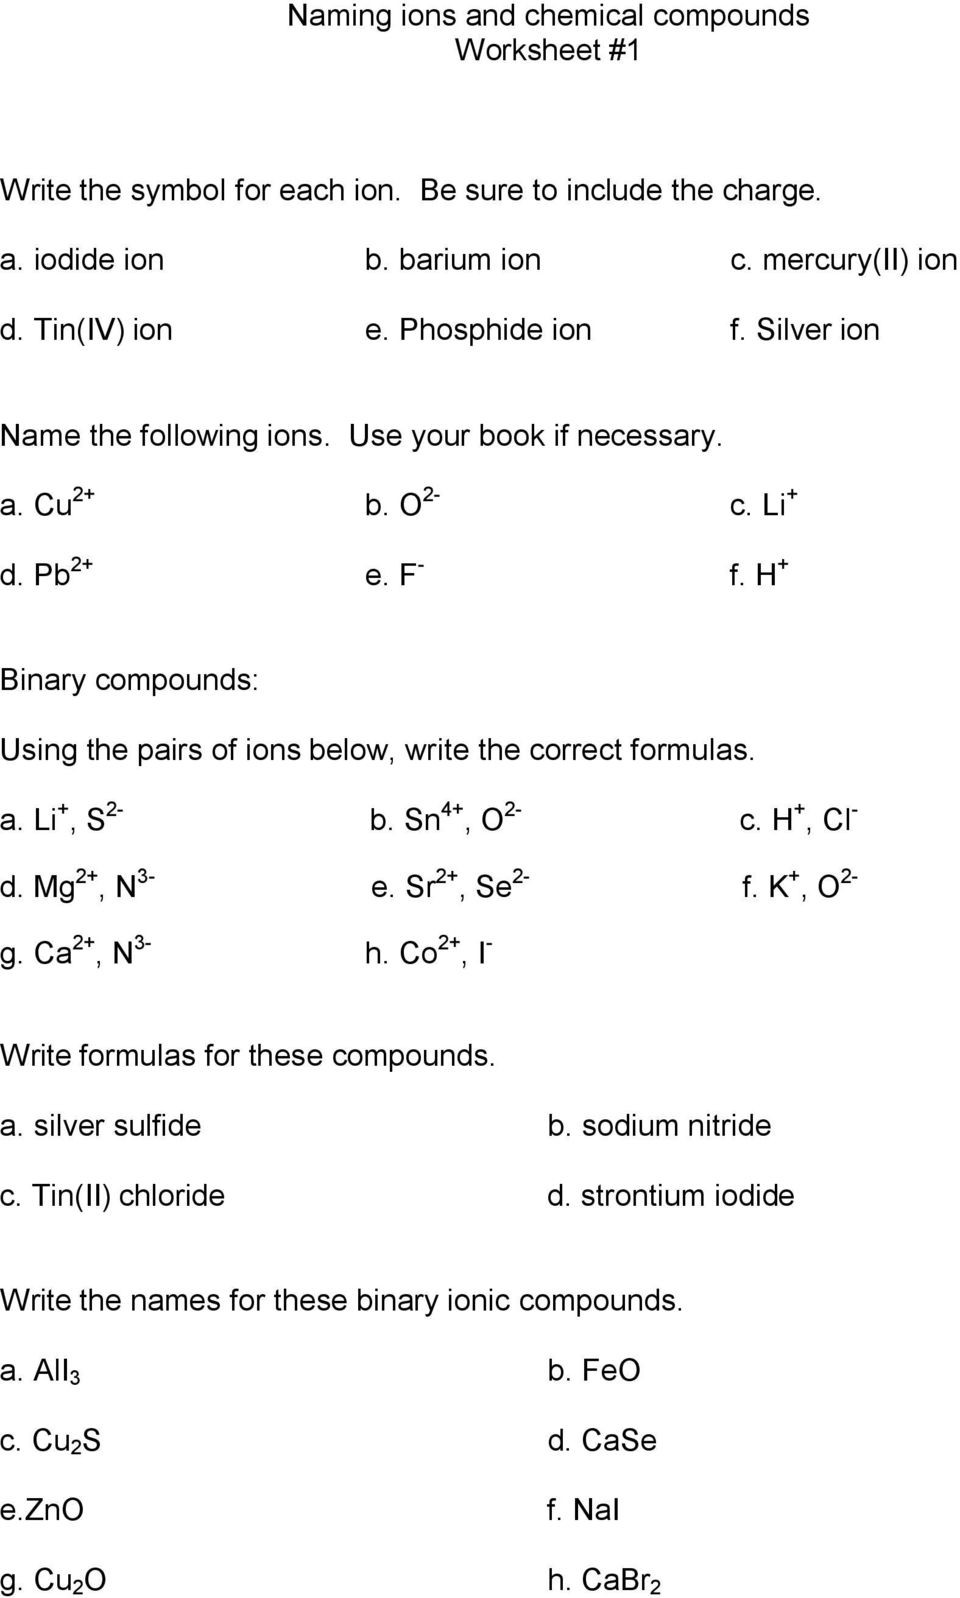 Naming Ionic Compounds Worksheet Answers Naming Ions and Chemical Pounds Worksheet 1 A Iodide